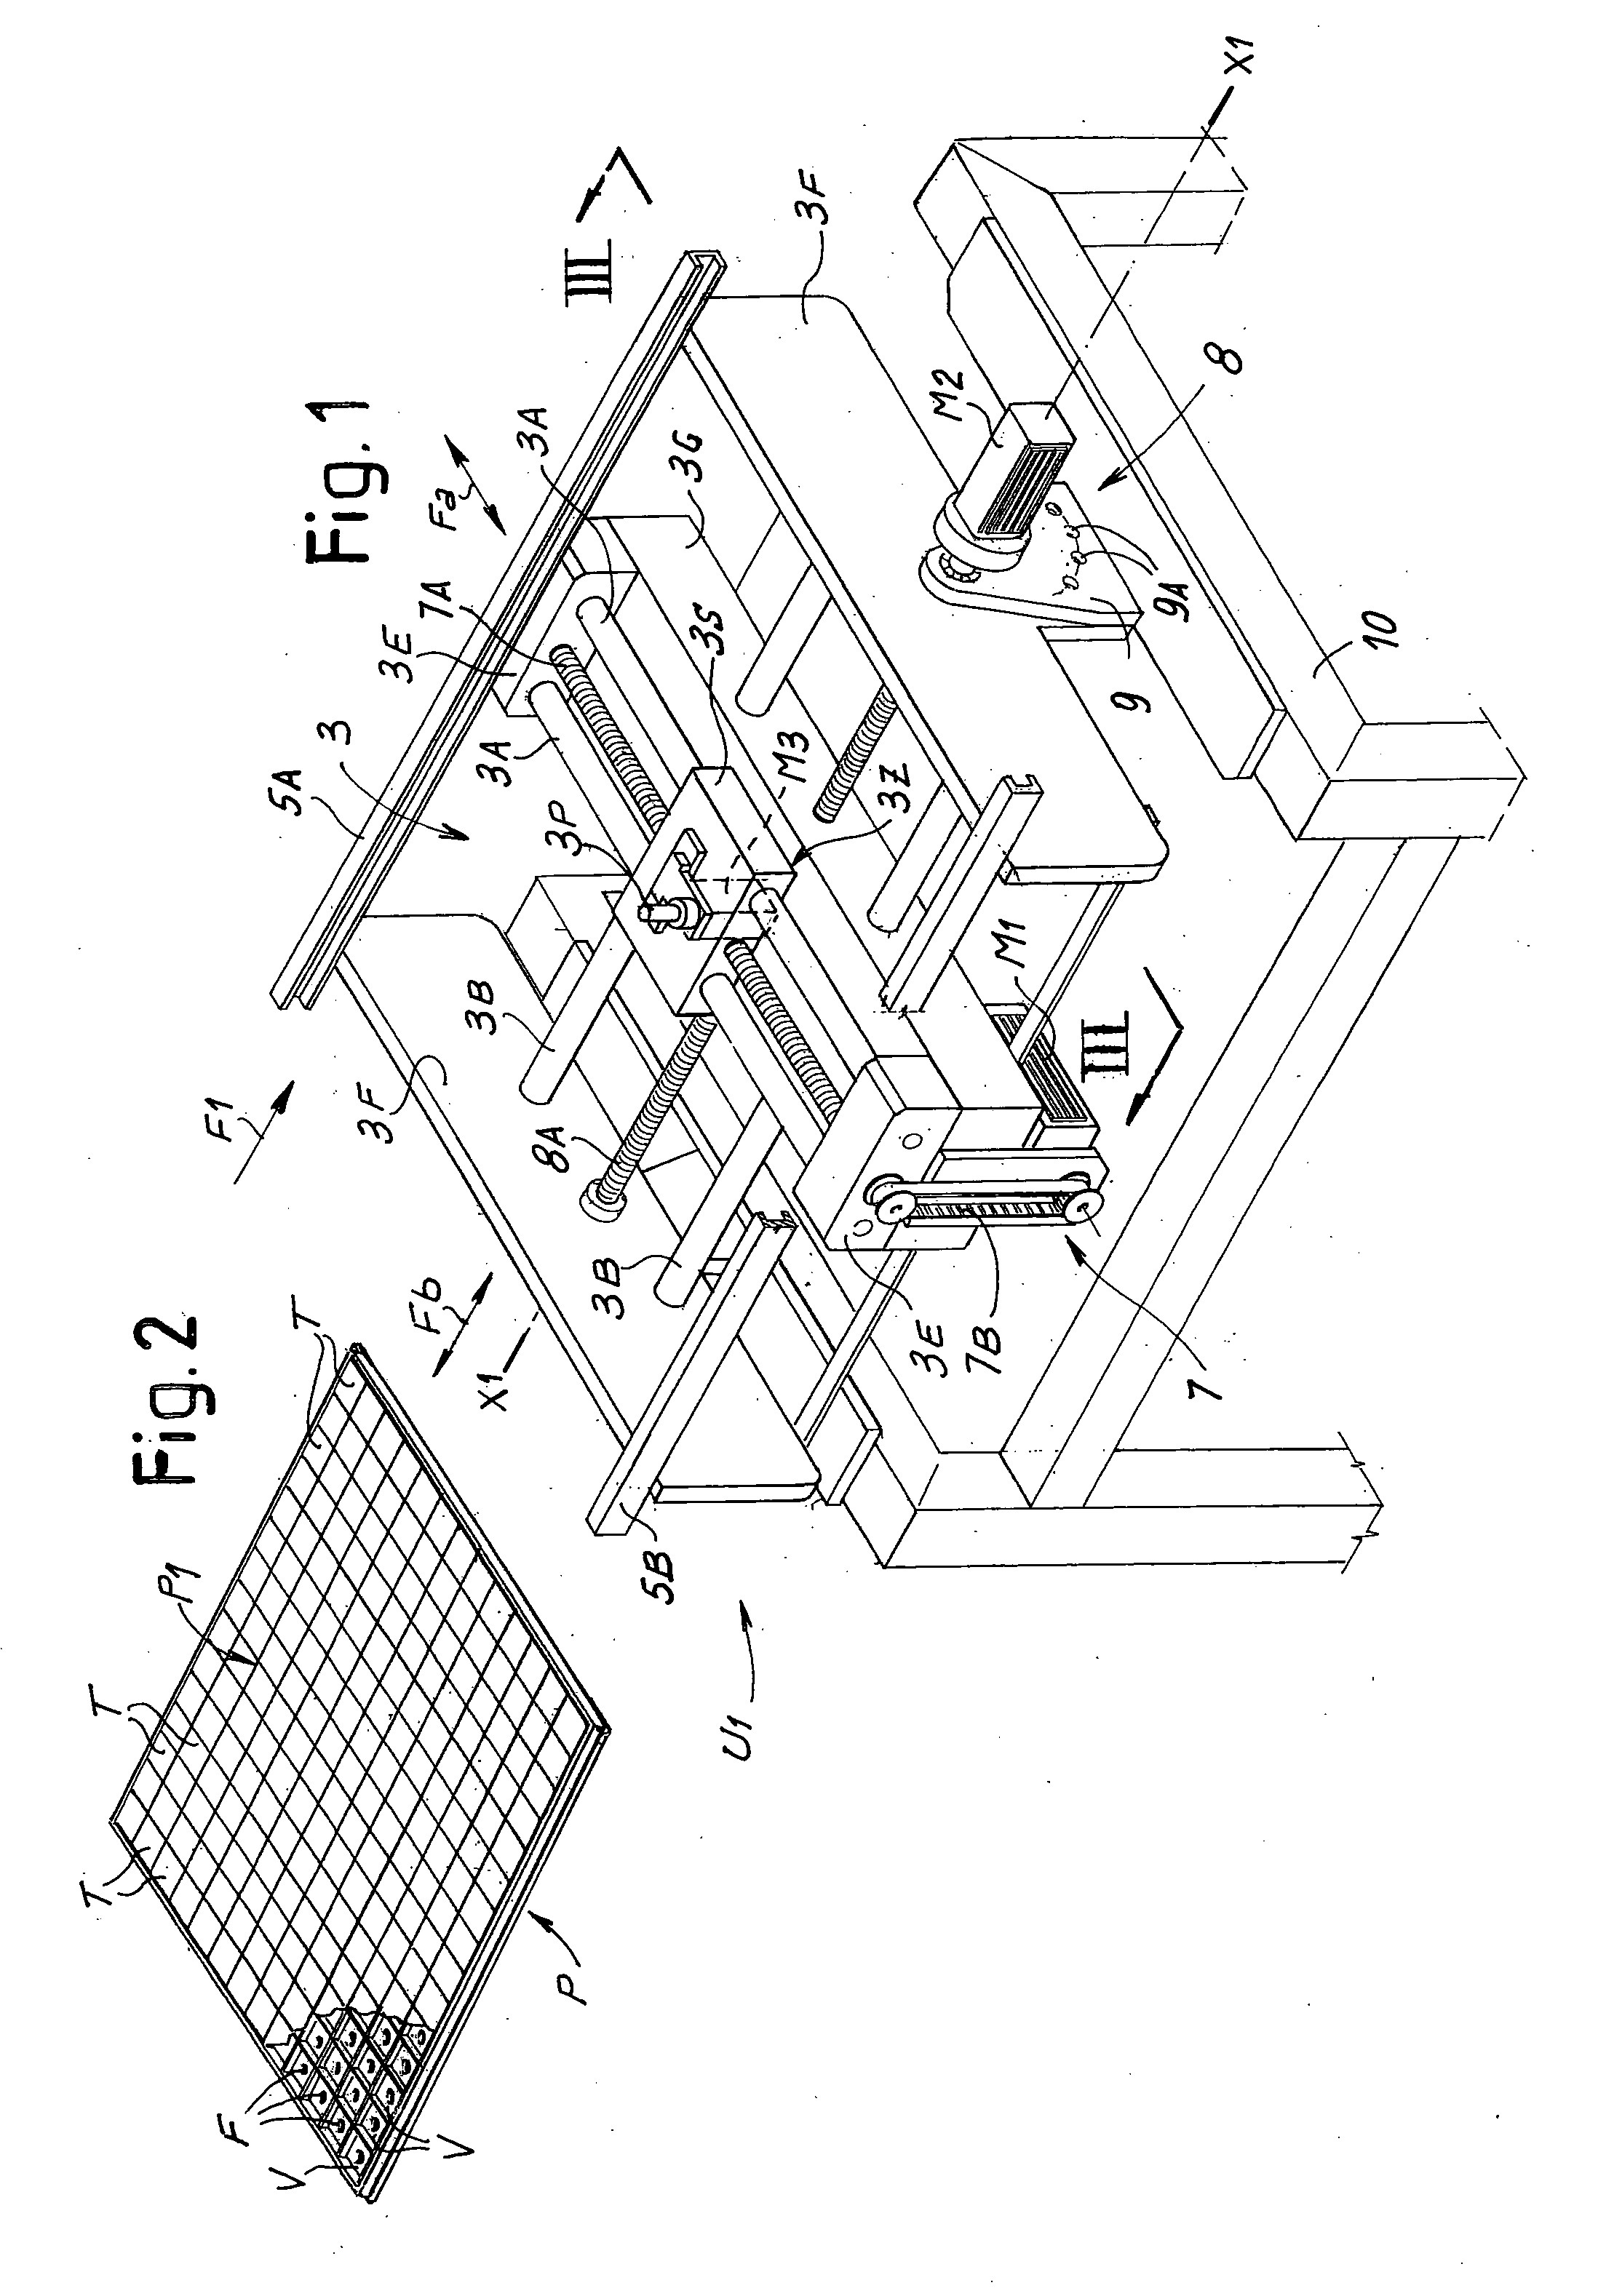 Machine and a method for filling containment panels with tiles to form mosaic patterns